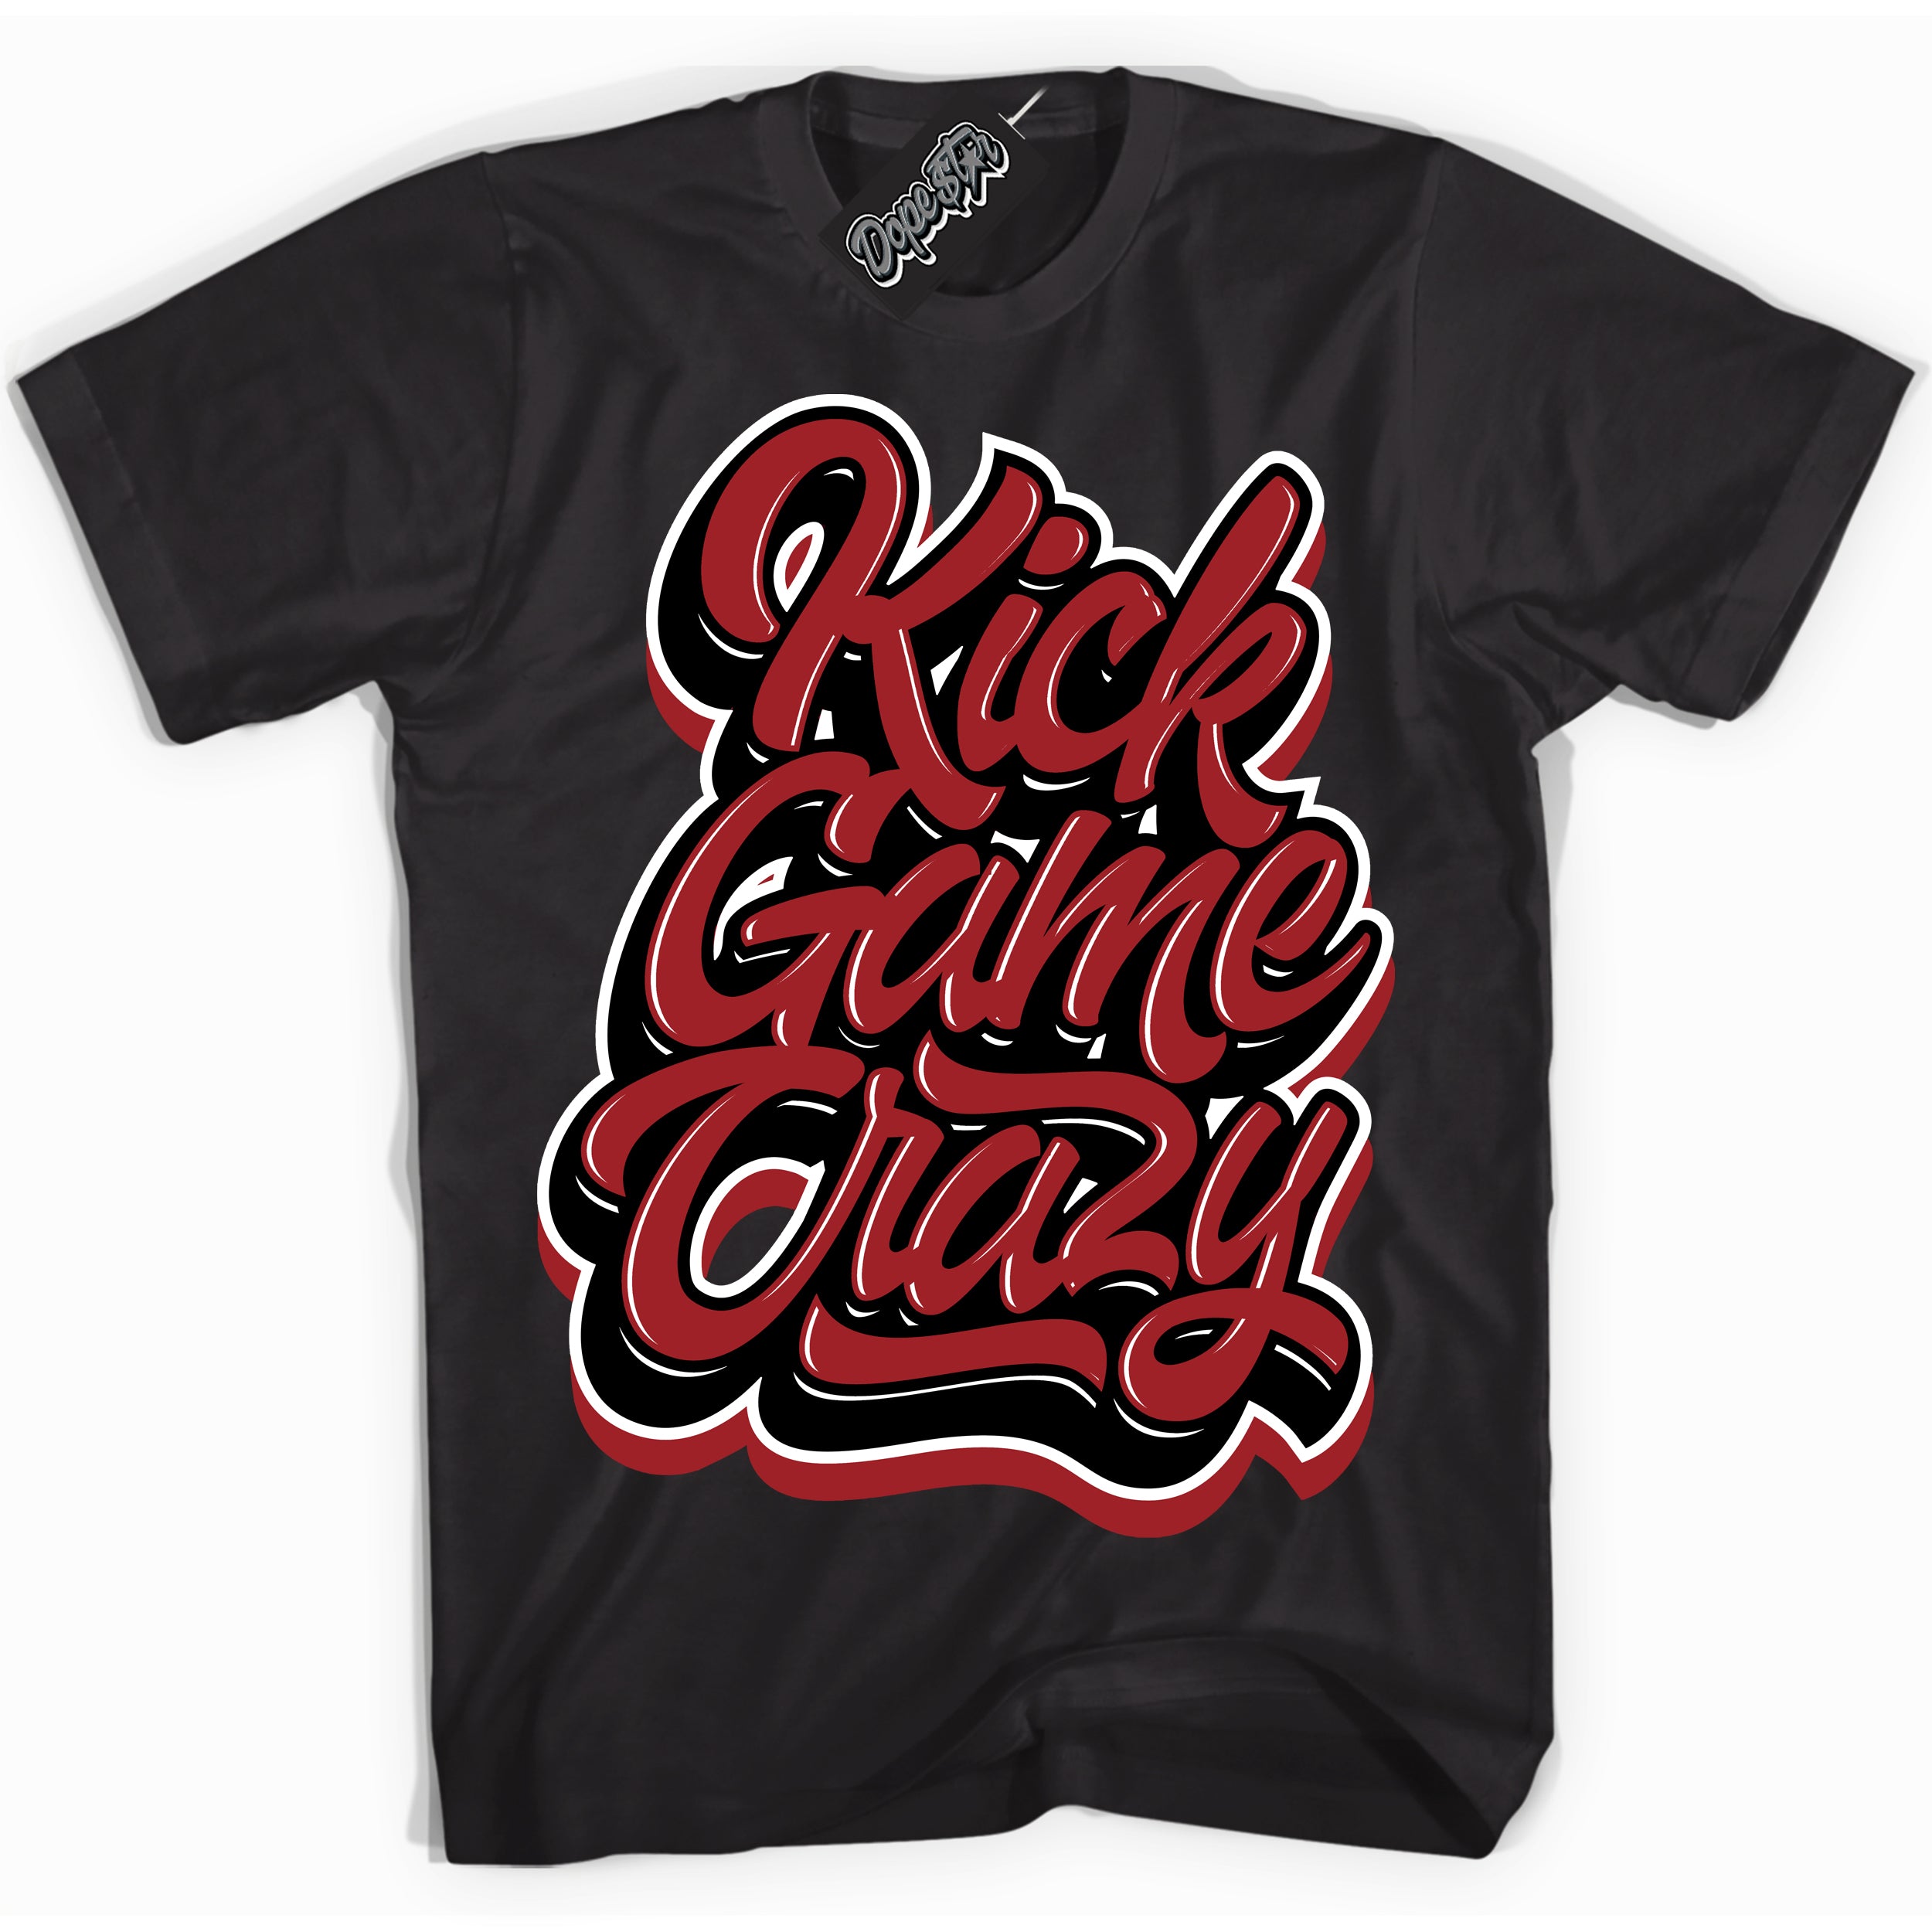 Cool Black graphic tee with “ Kick Game Crazy ” print, that perfectly matches Lost And Found 1s sneakers 